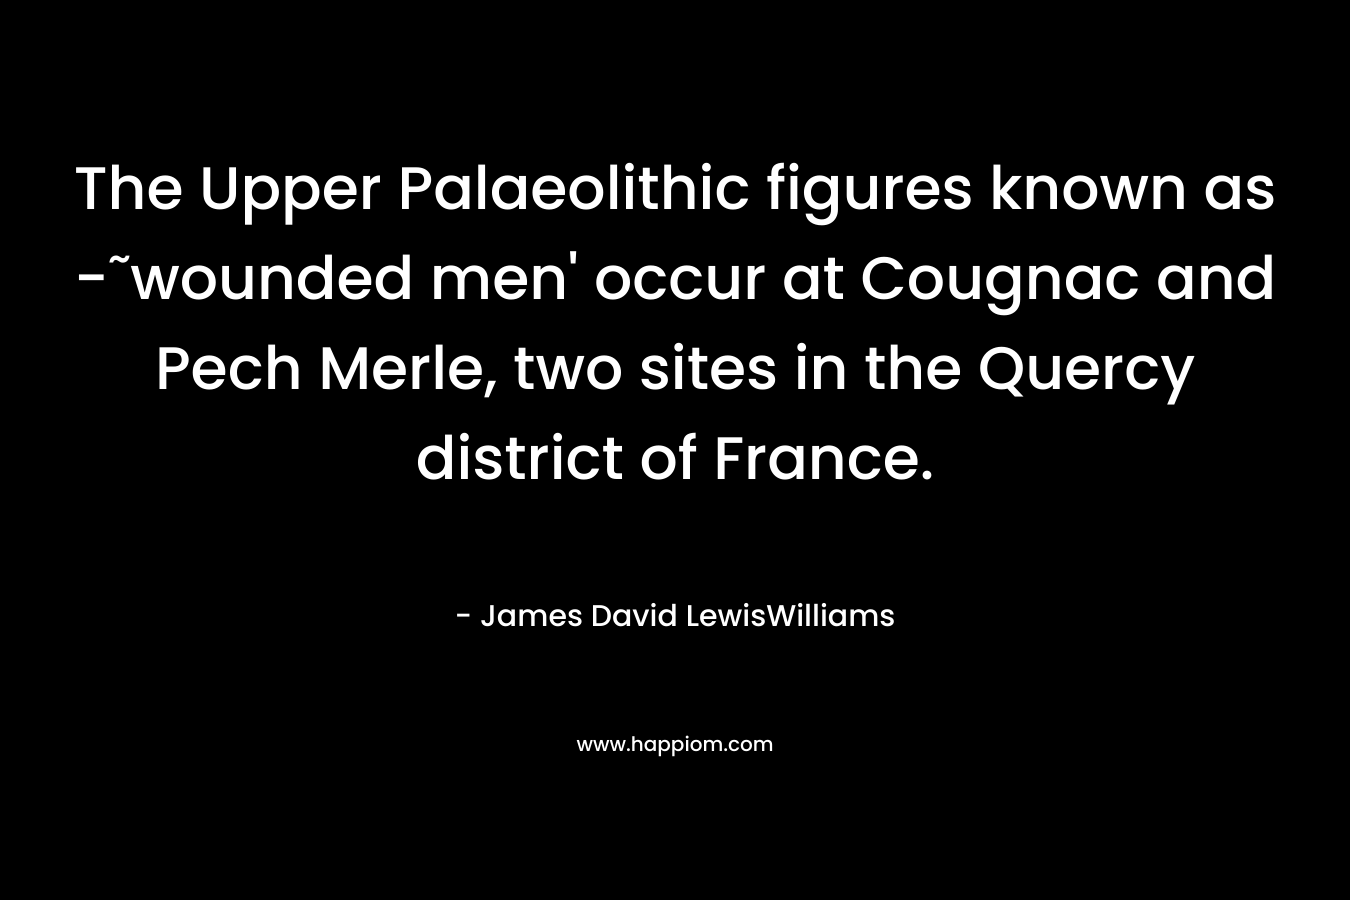 The Upper Palaeolithic figures known as -˜wounded men’ occur at Cougnac and Pech Merle, two sites in the Quercy district of France. – James David LewisWilliams